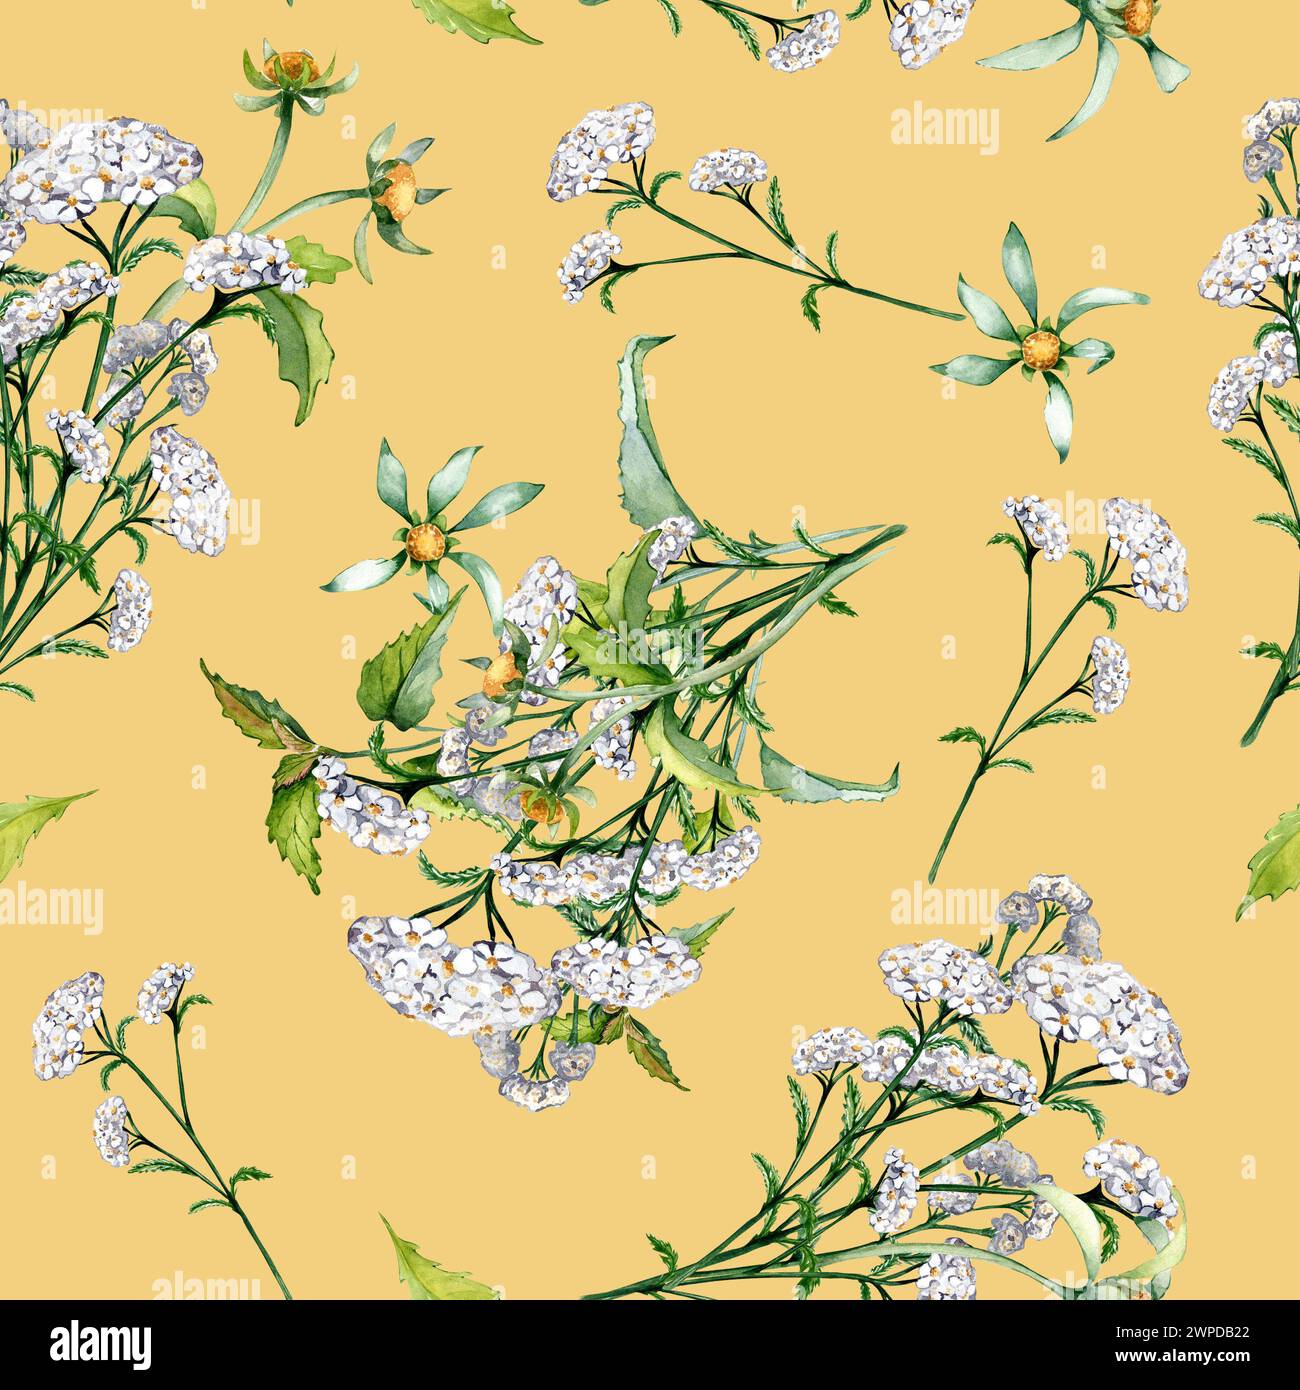 Achillea yarrow, nettle, bidens beggarticks watercolor seamless pattern isolated on beige. Medicinal flowers painted. Useful herbs, medicinal plants h Stock Photo